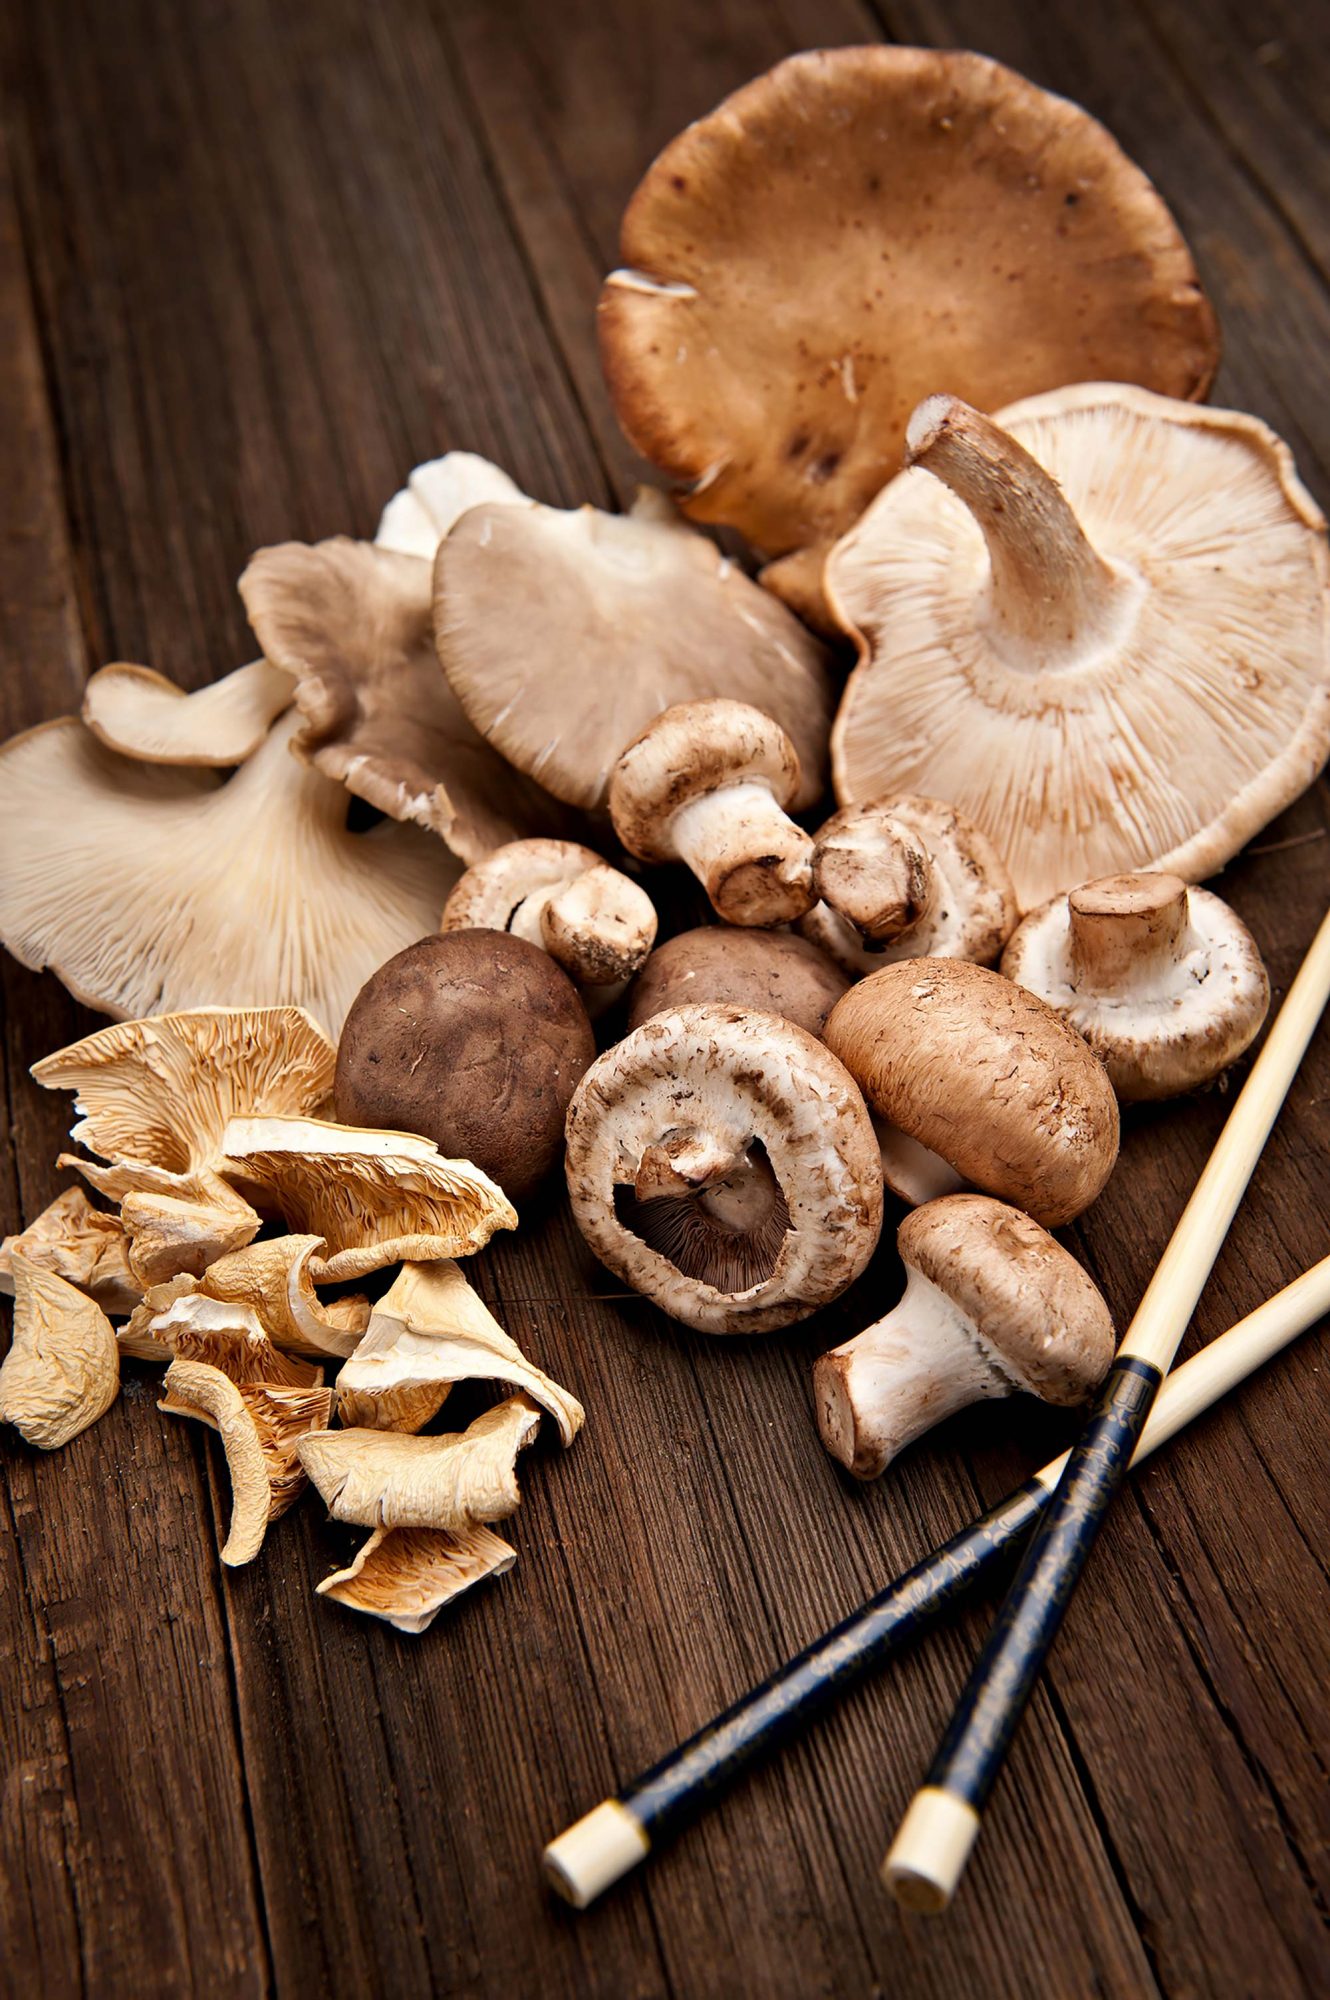 Mushrooms for Cancer: Fight & Prevent Cancer with Mushrooms